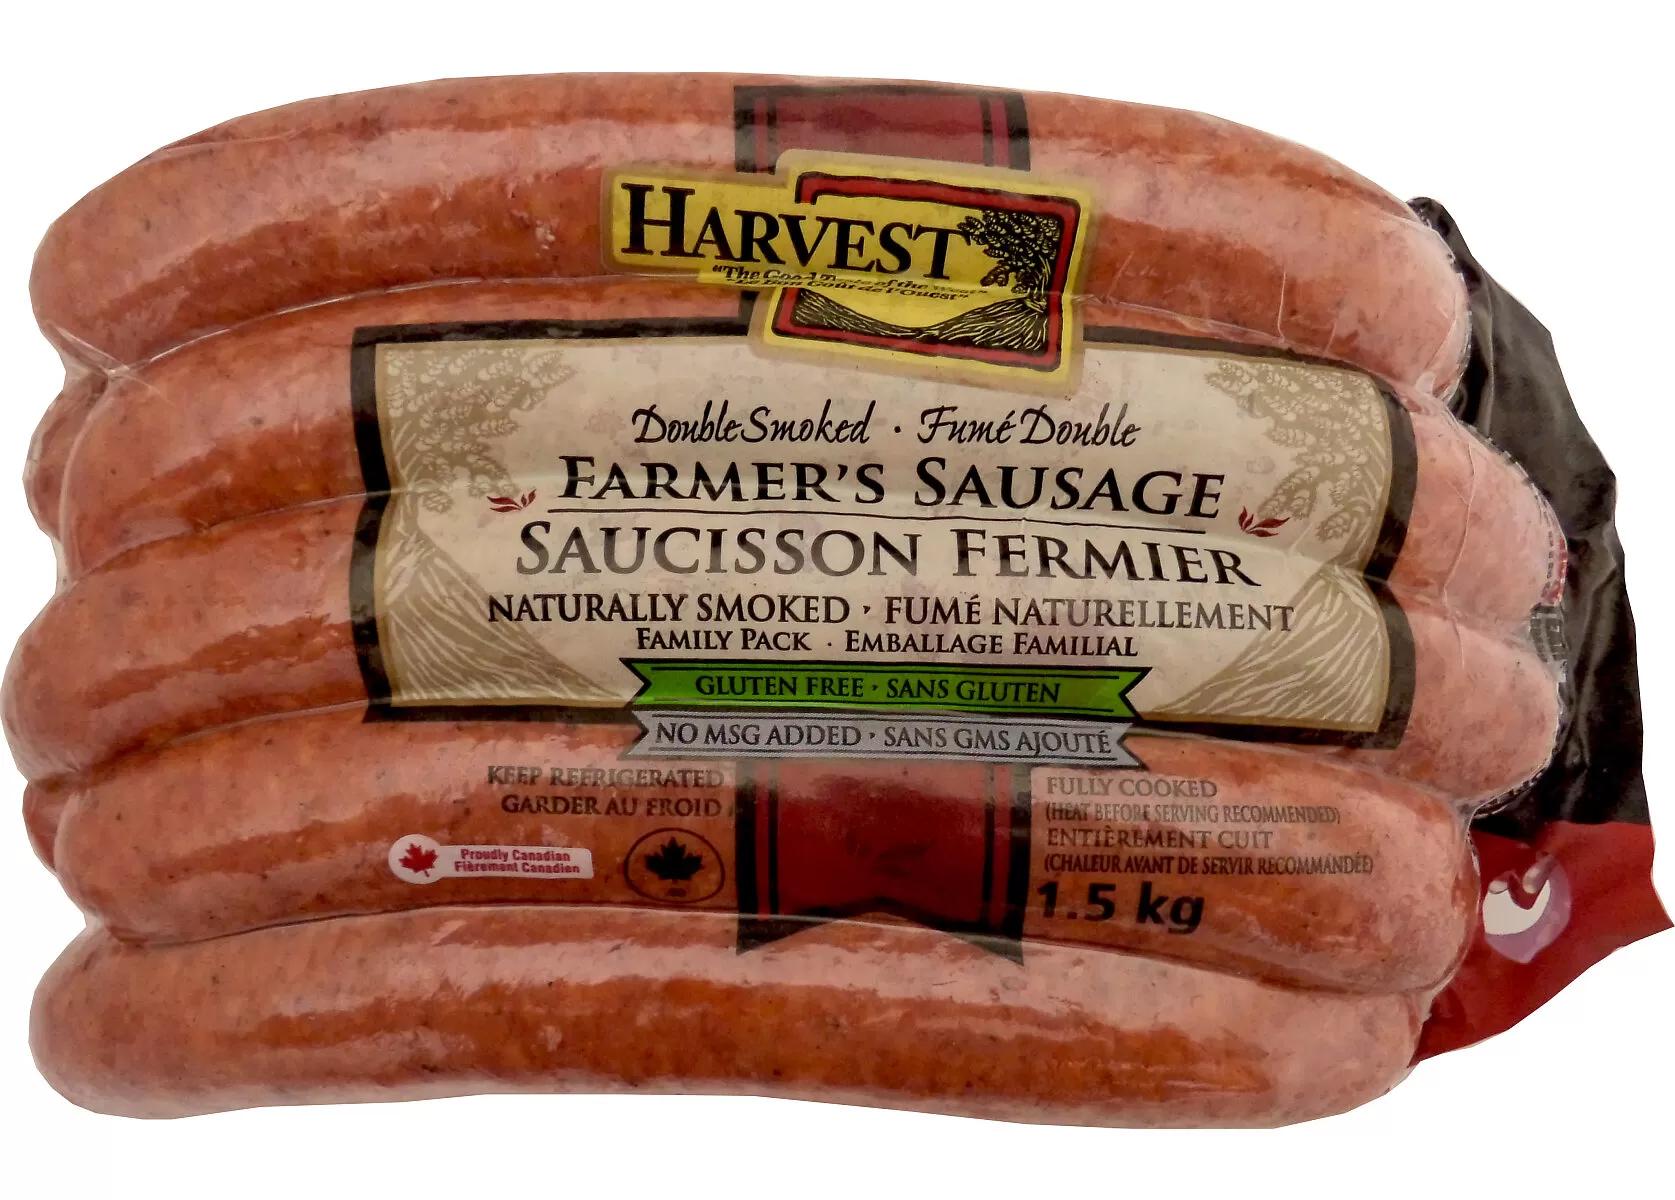 double smoked sausage - What is double smoked sausage